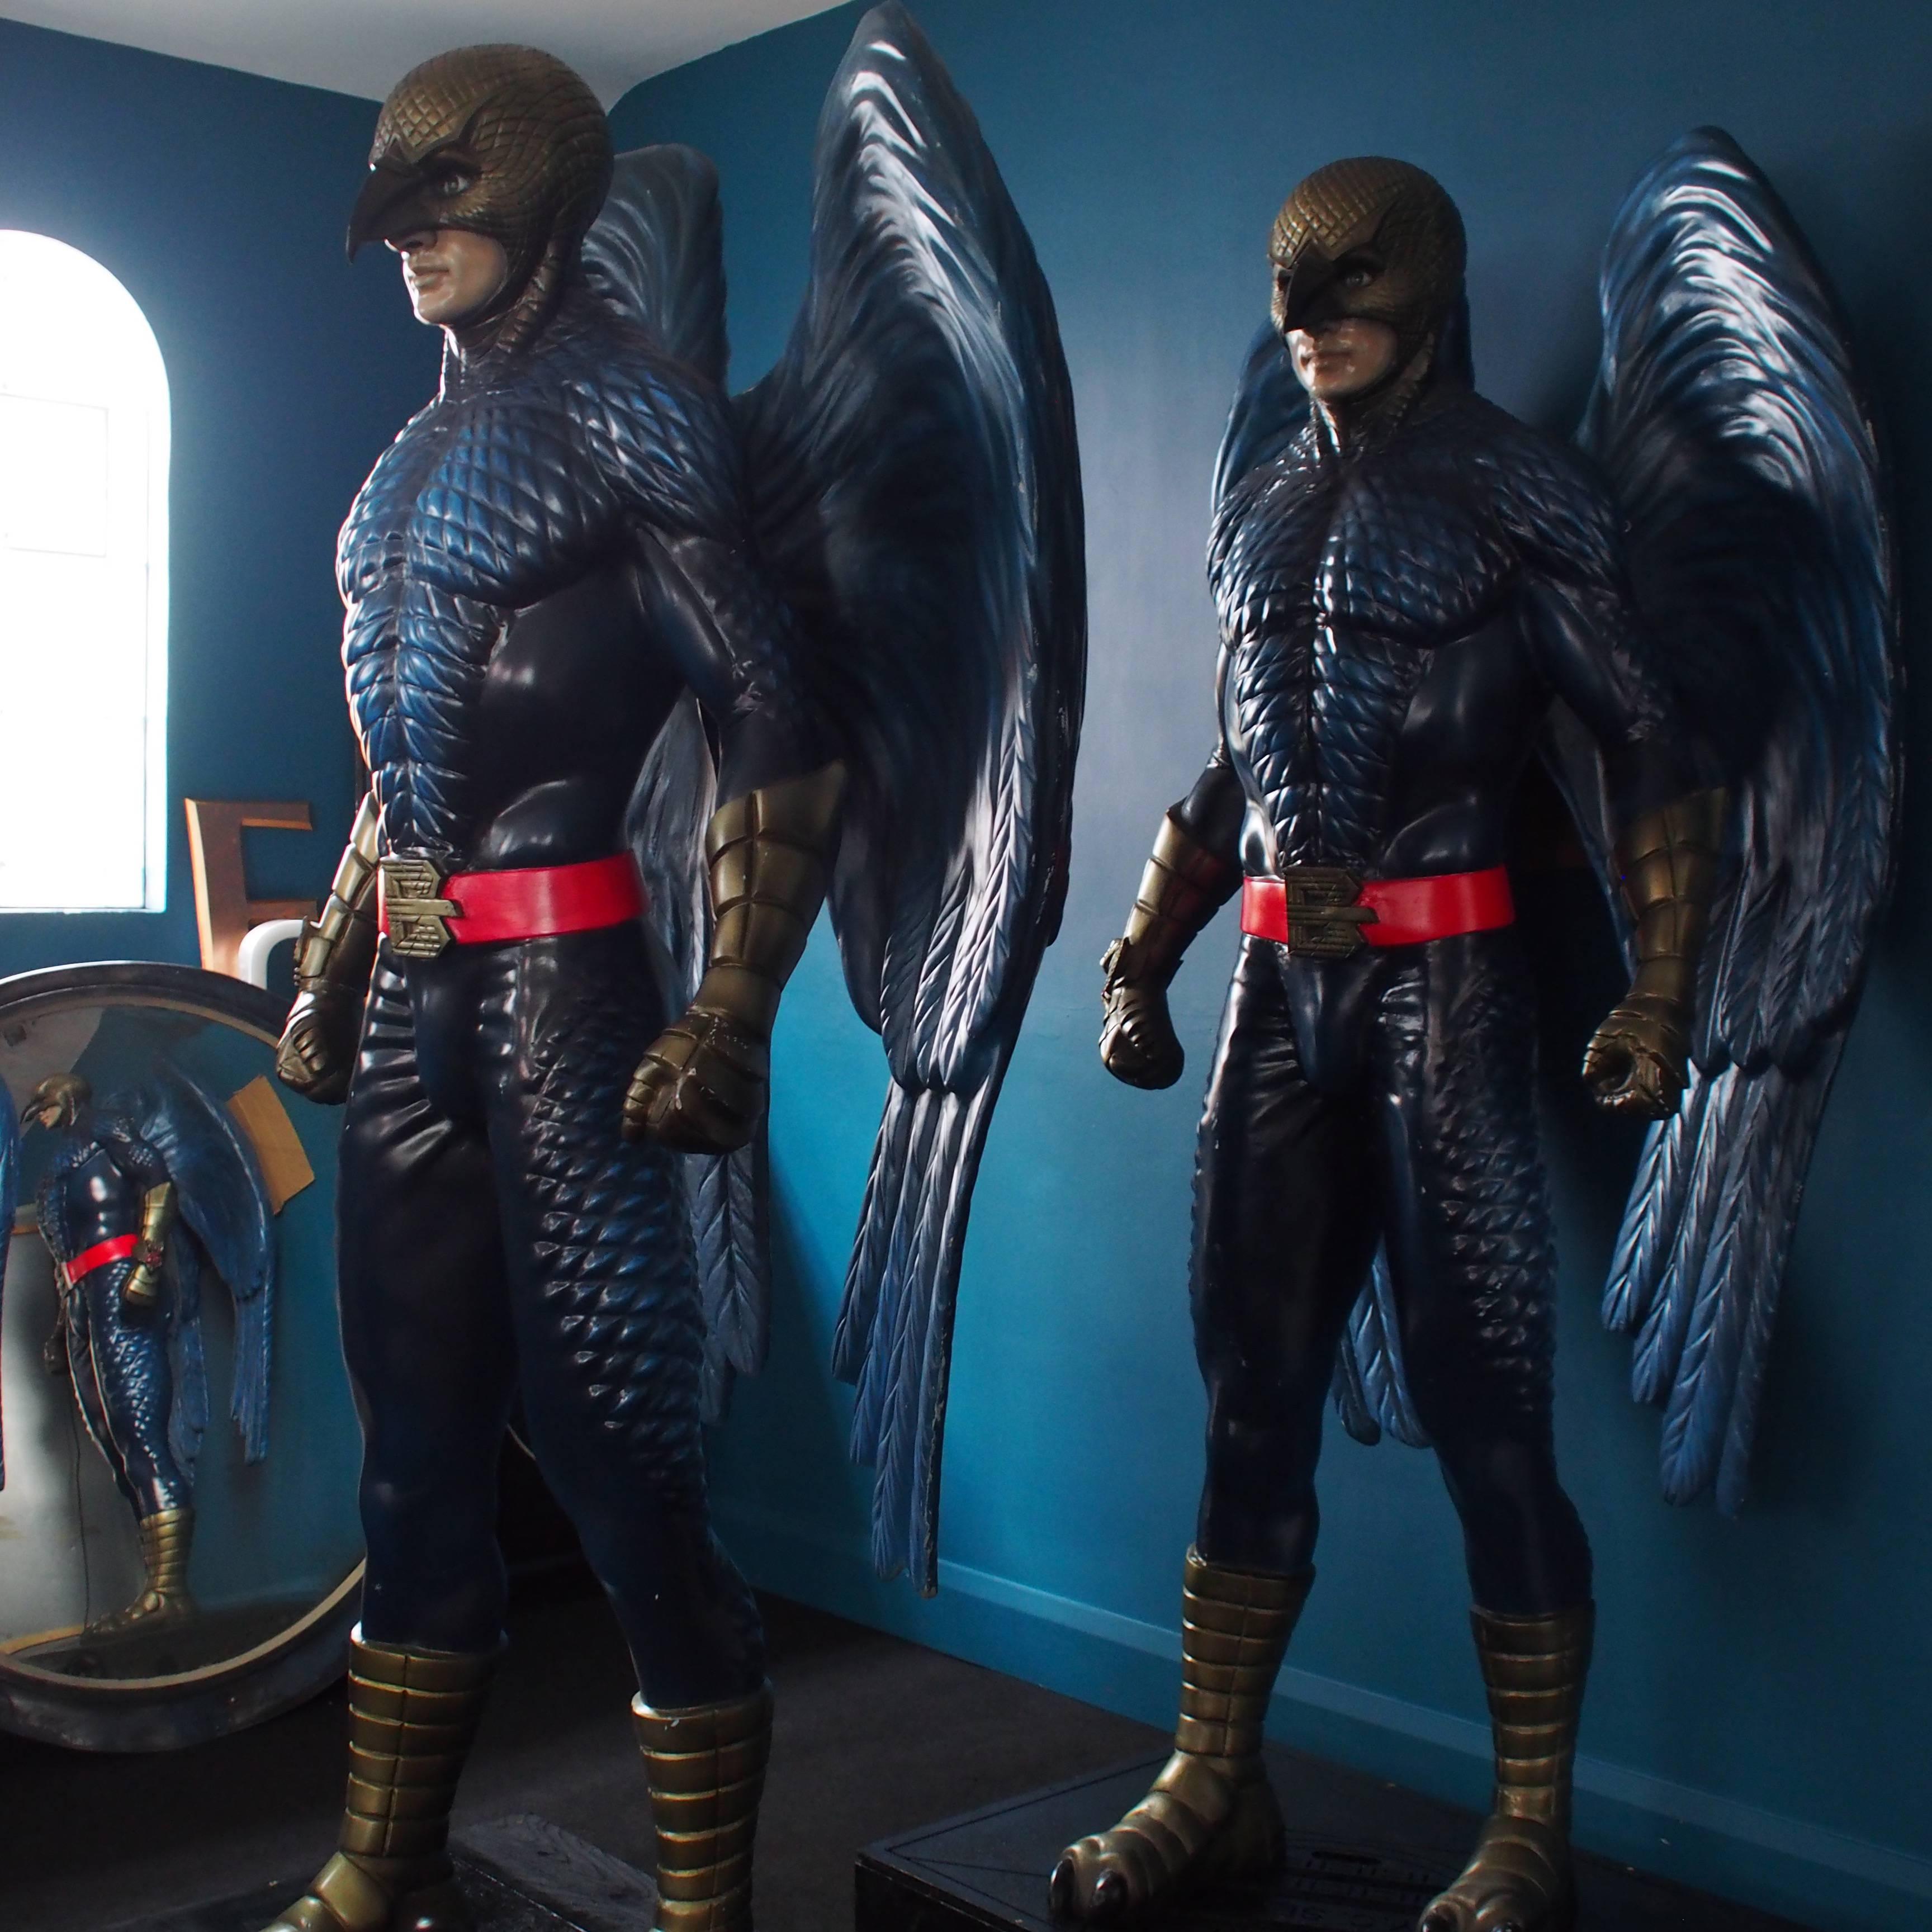 Contemporary Pair of Birdman Figures from the Film's Premiere, Starring Michael Keaton